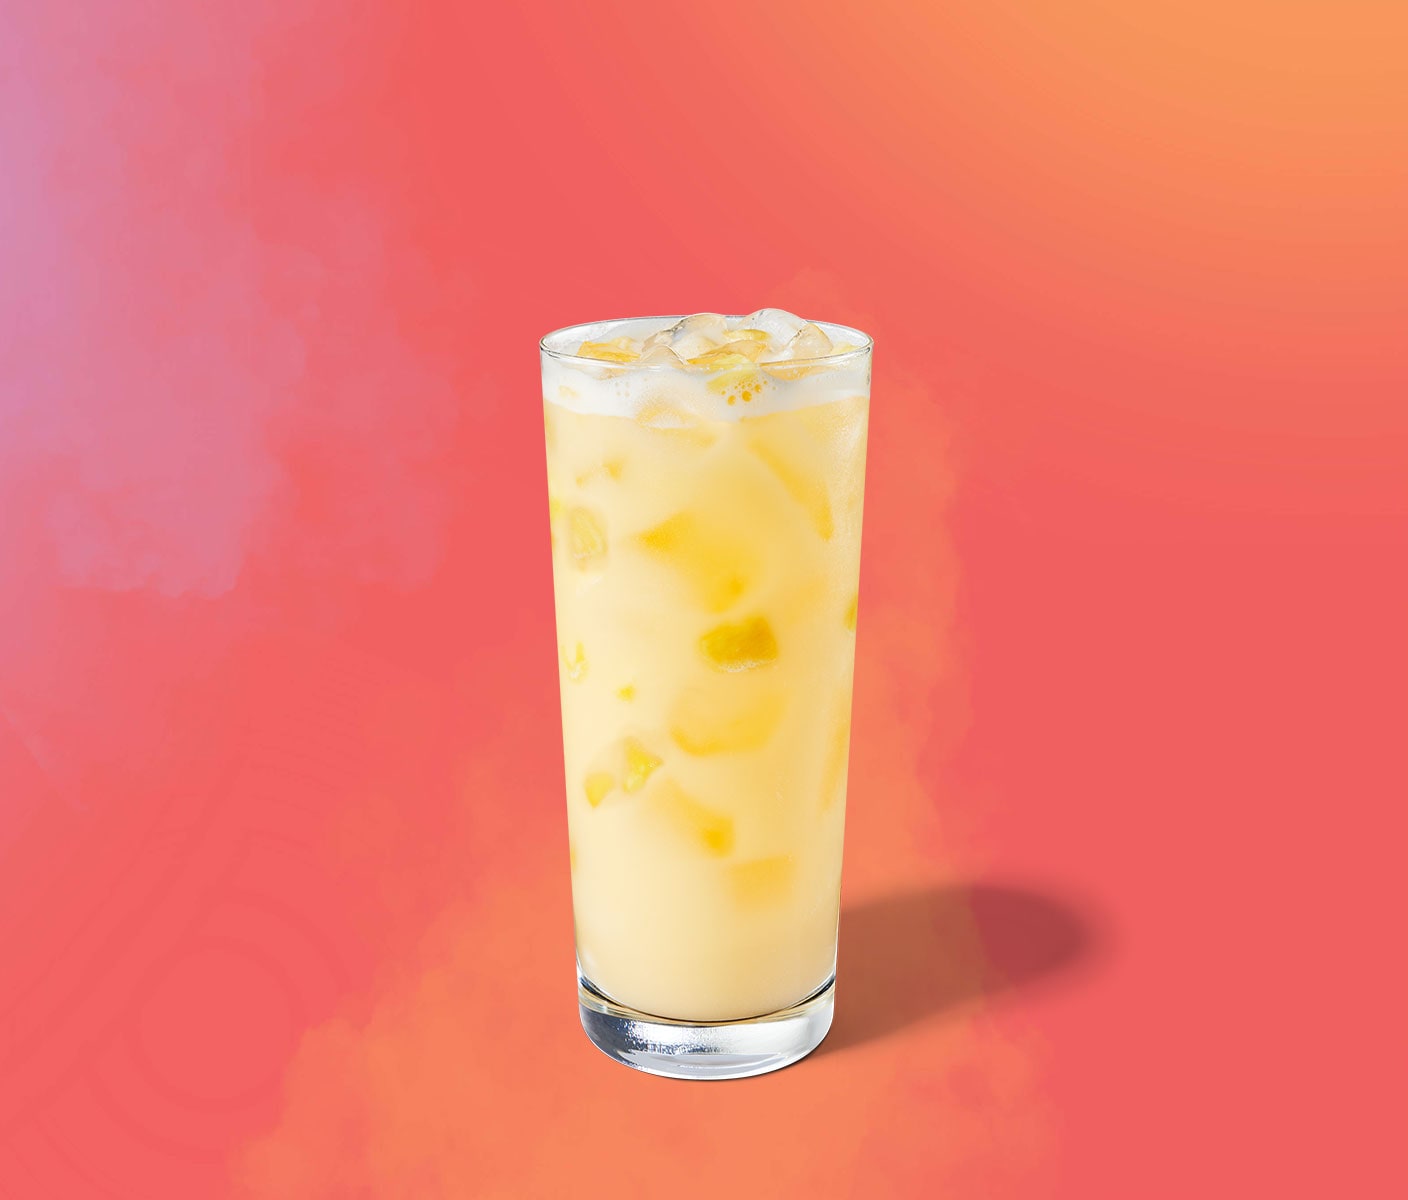 Creamy yellow iced drink with pineapple inclusions in a tall glass.